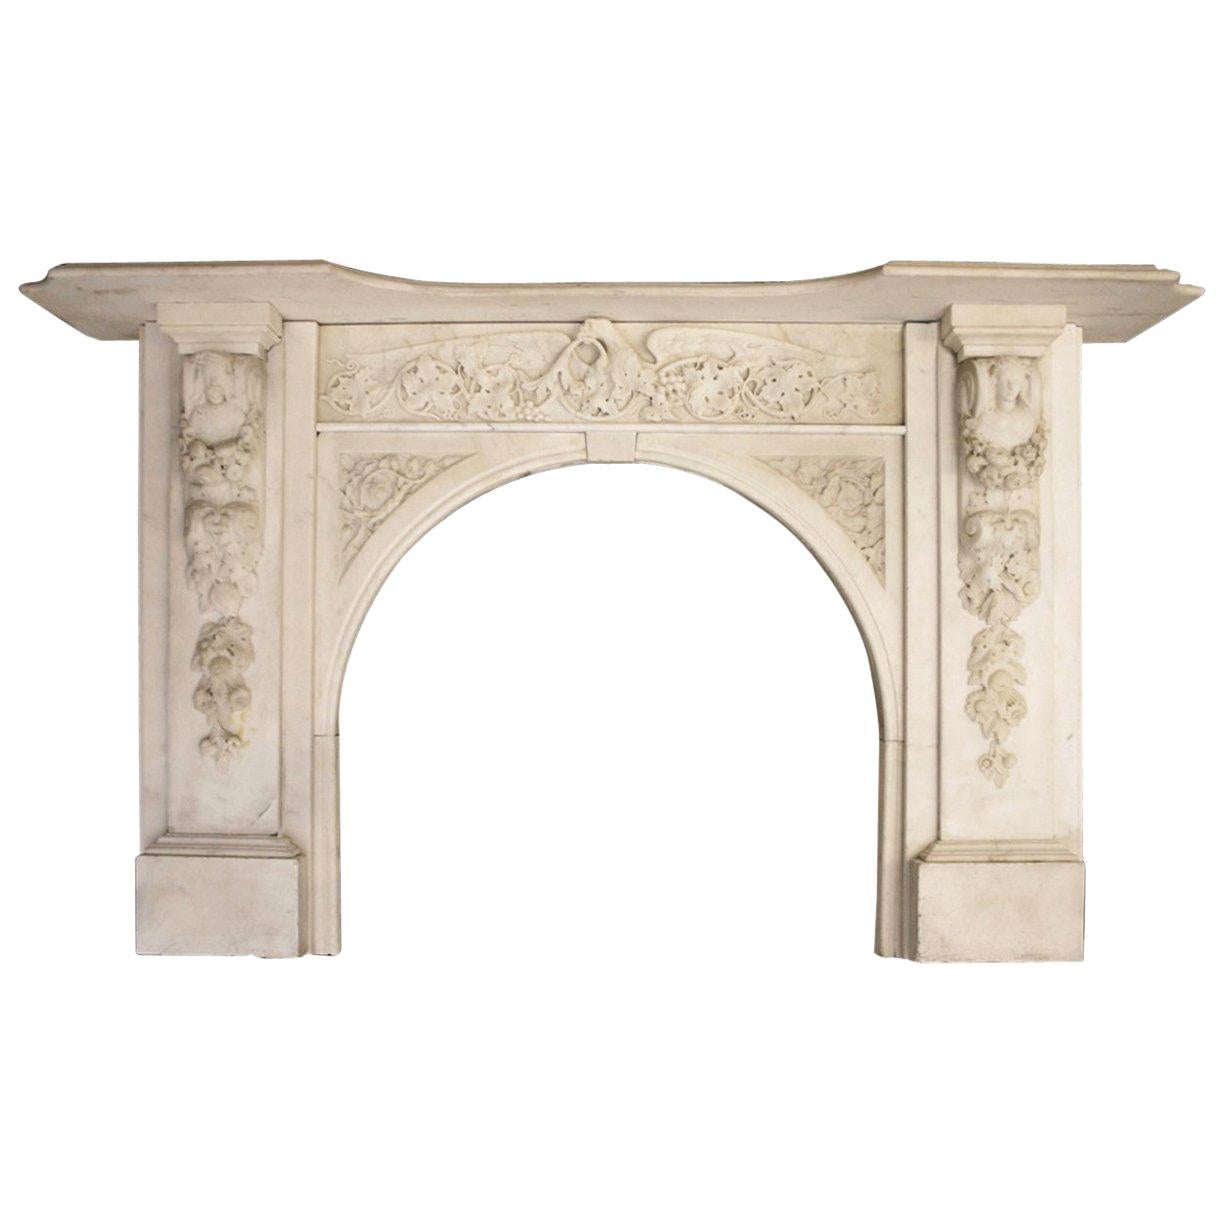 Spectacular Antique Early Victorian Carved Marble Chimneypiece For Sale